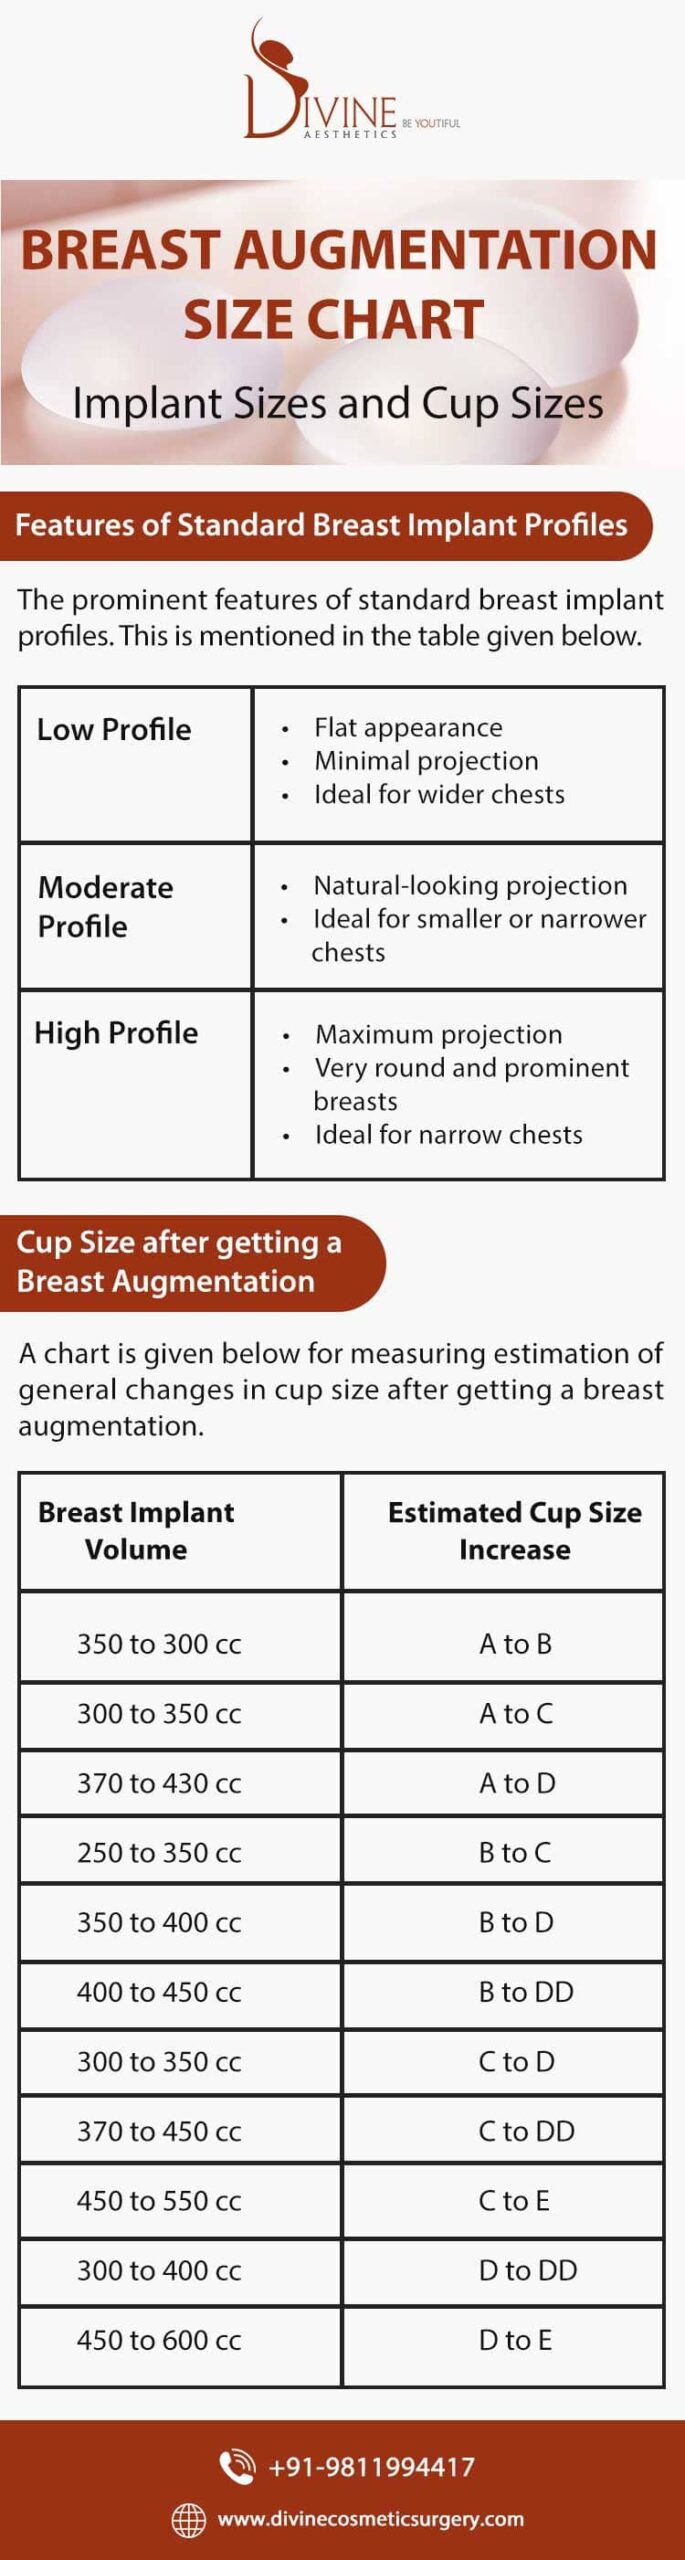 Breast Implant: A comprehensive guide from A to D Sizes